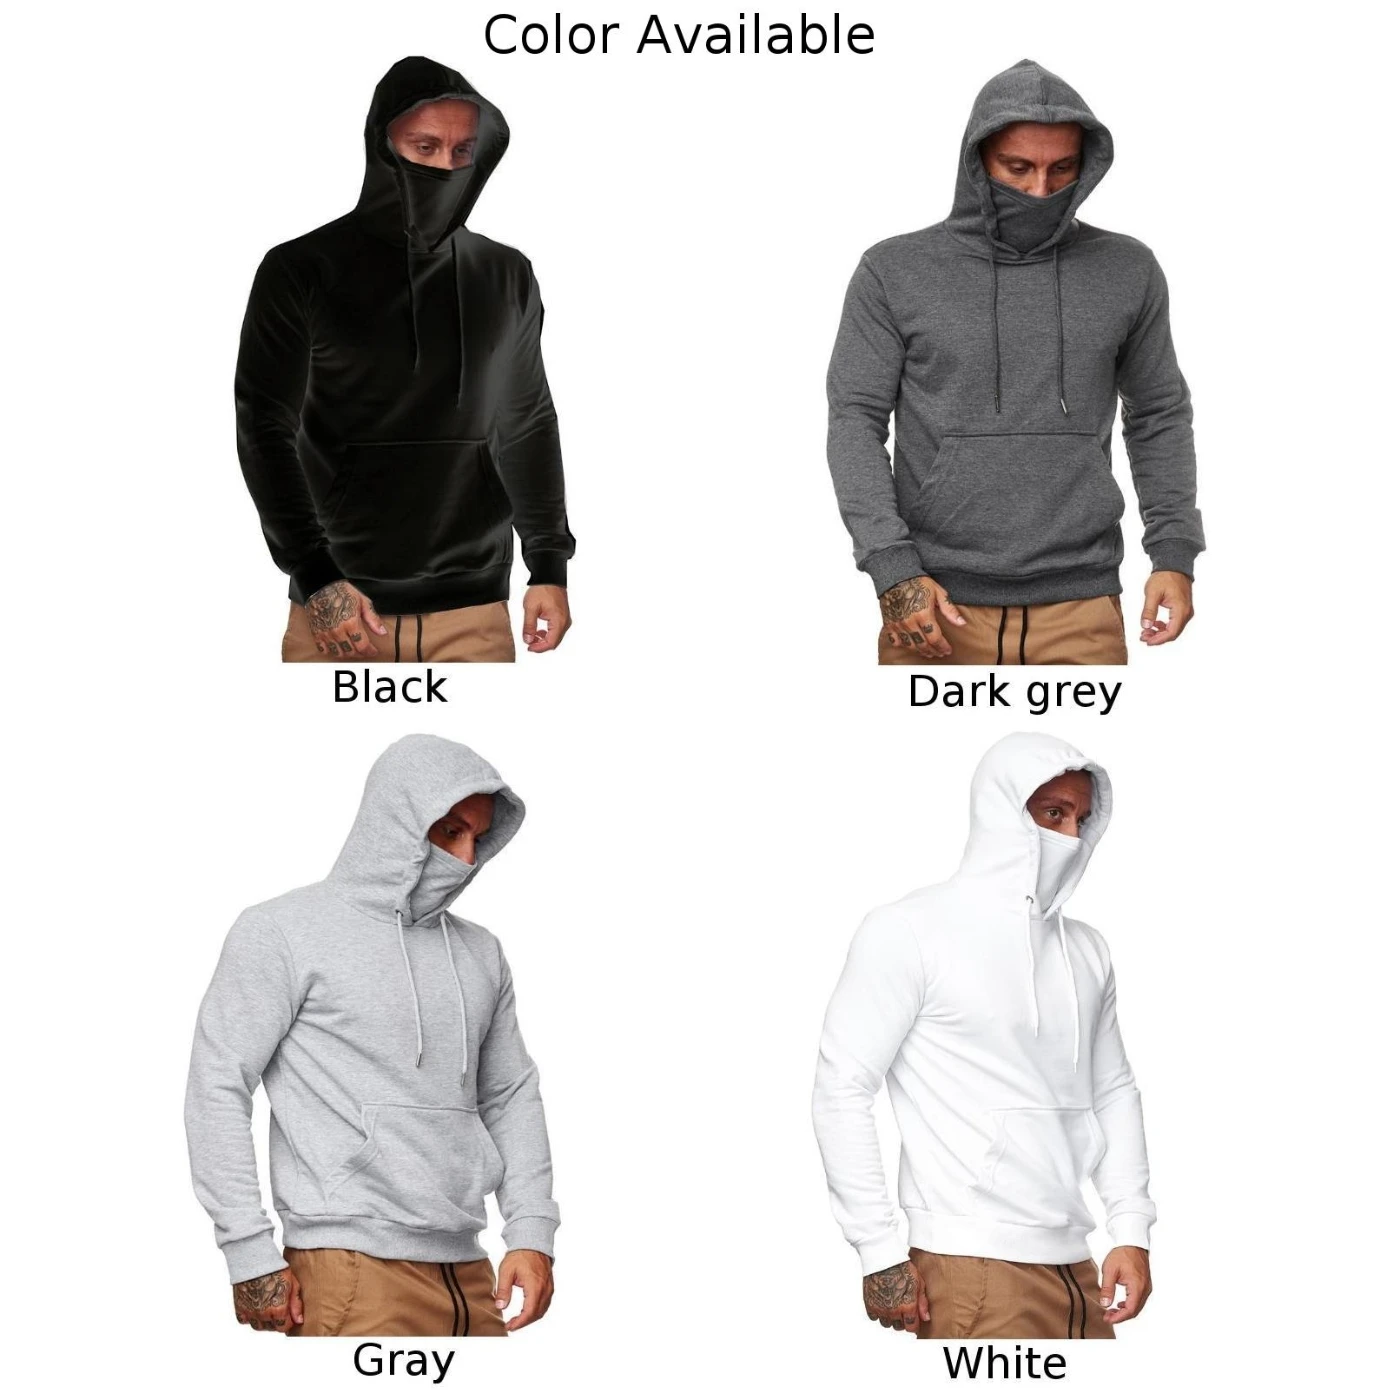 Men\'s Polyester Hooded Hoody with Face Guard Long Sleeve Casual Sweatshirt Pullover Black/White/Grey for All Occasions